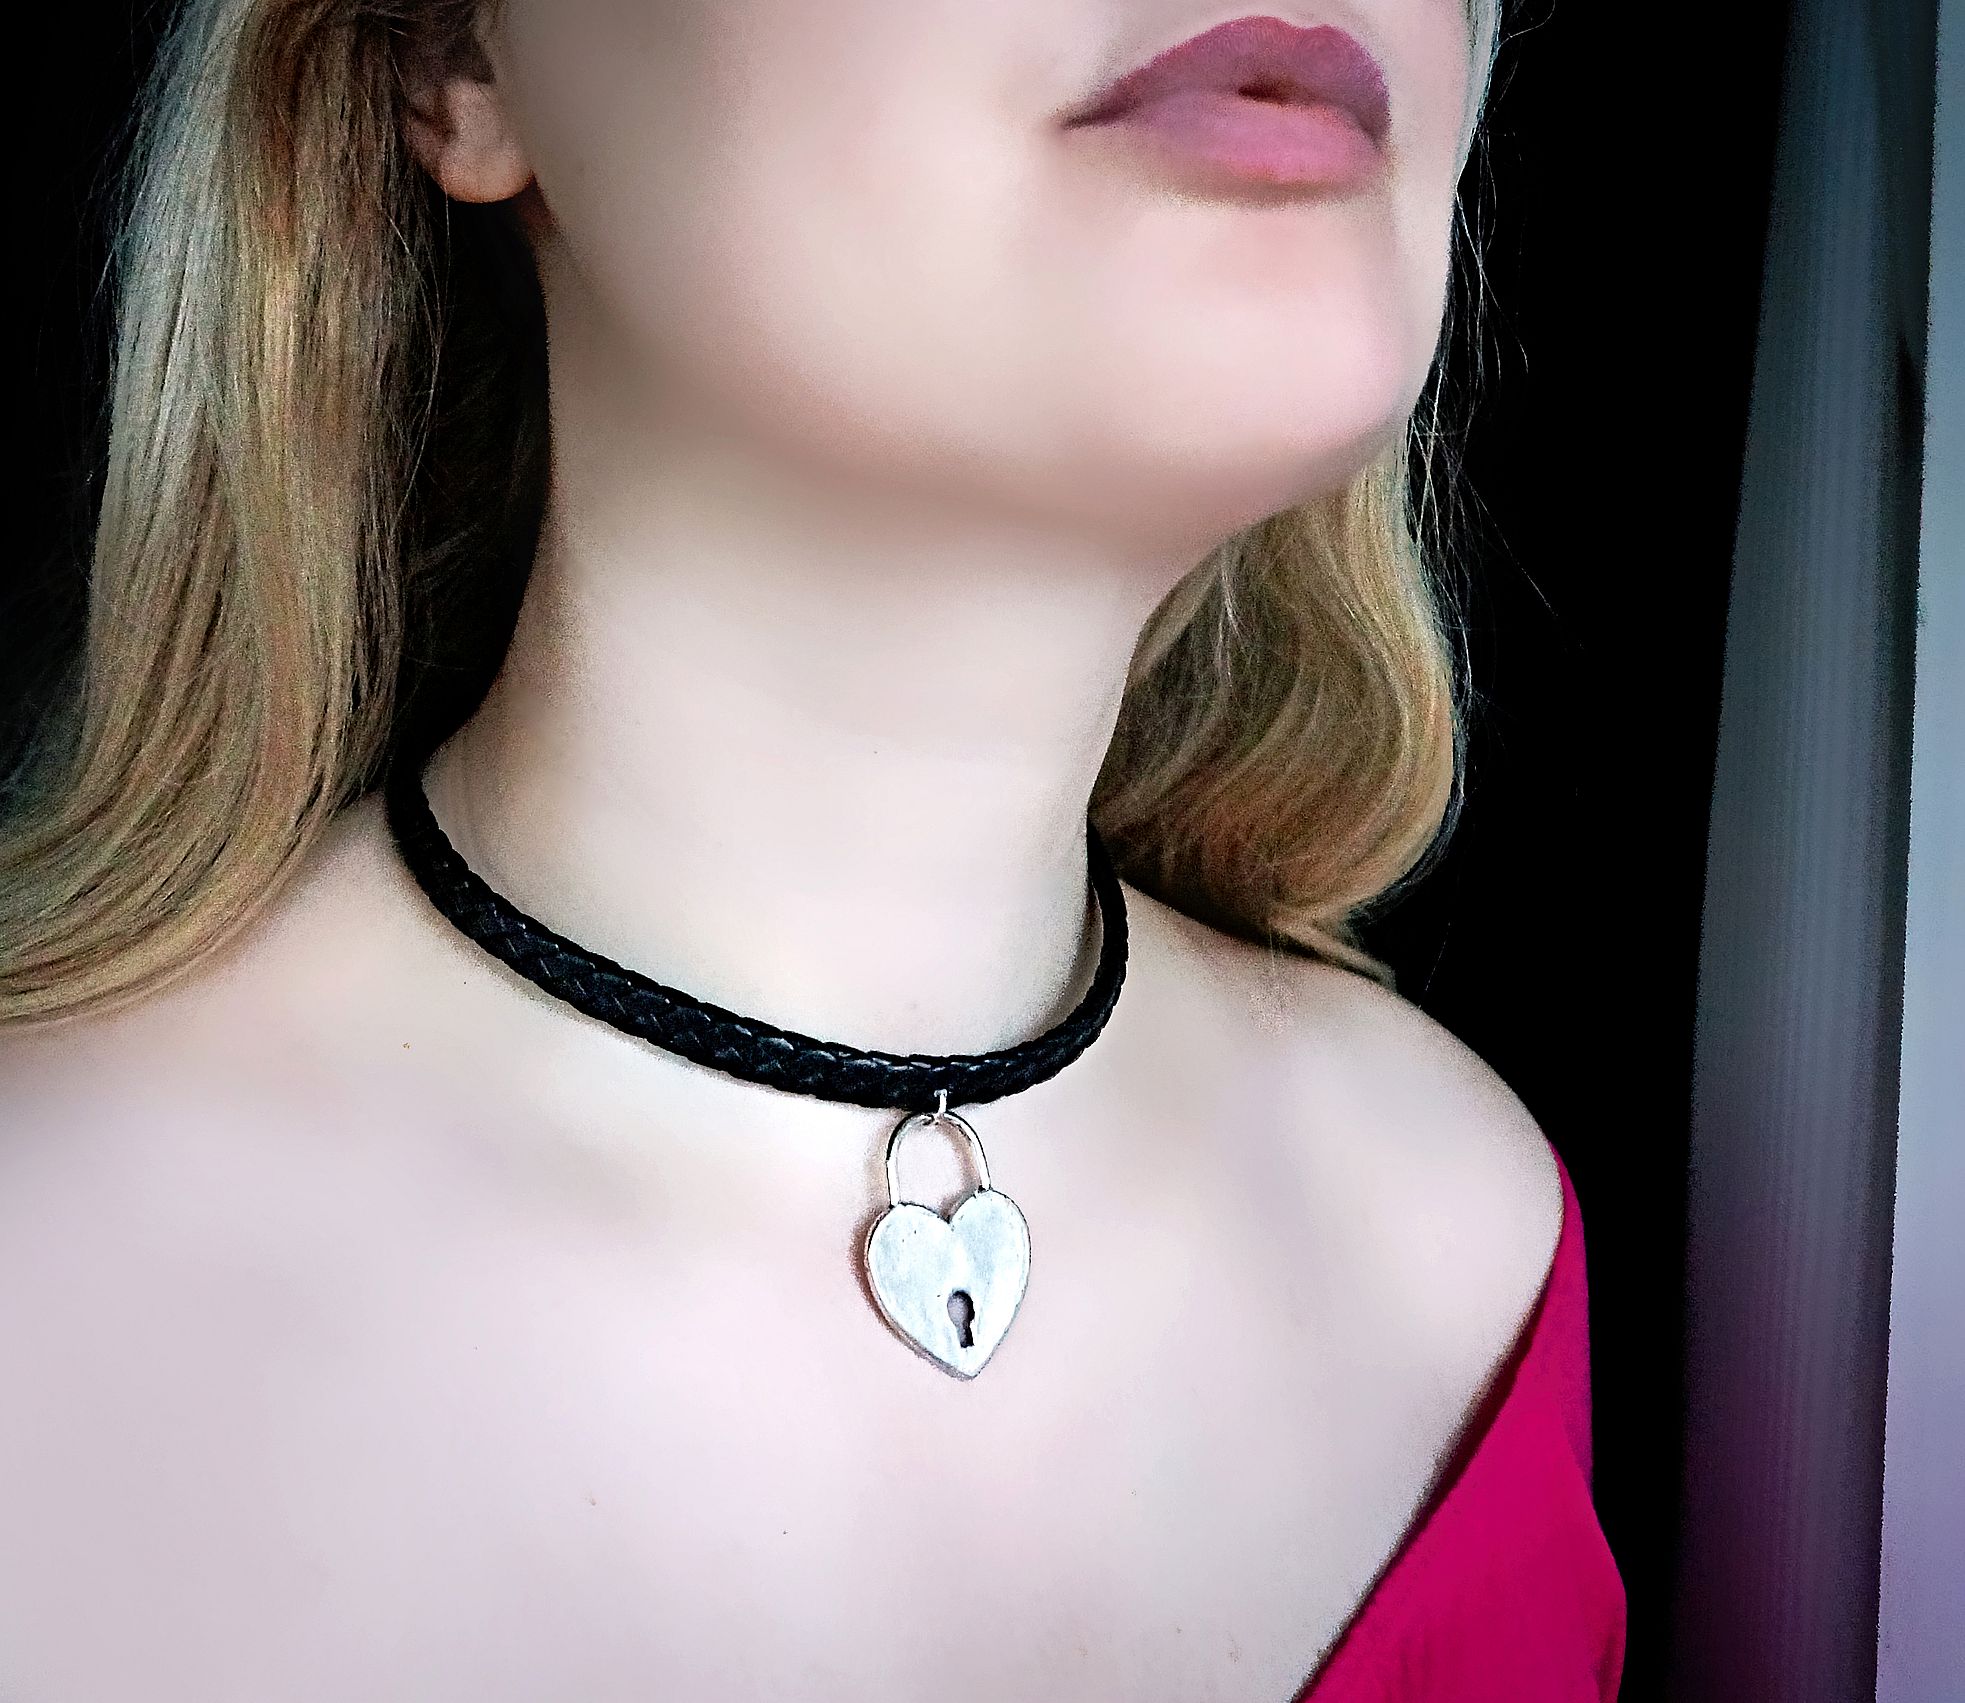 Steampunk BDSM jewelry submissive day collar heart necklace 